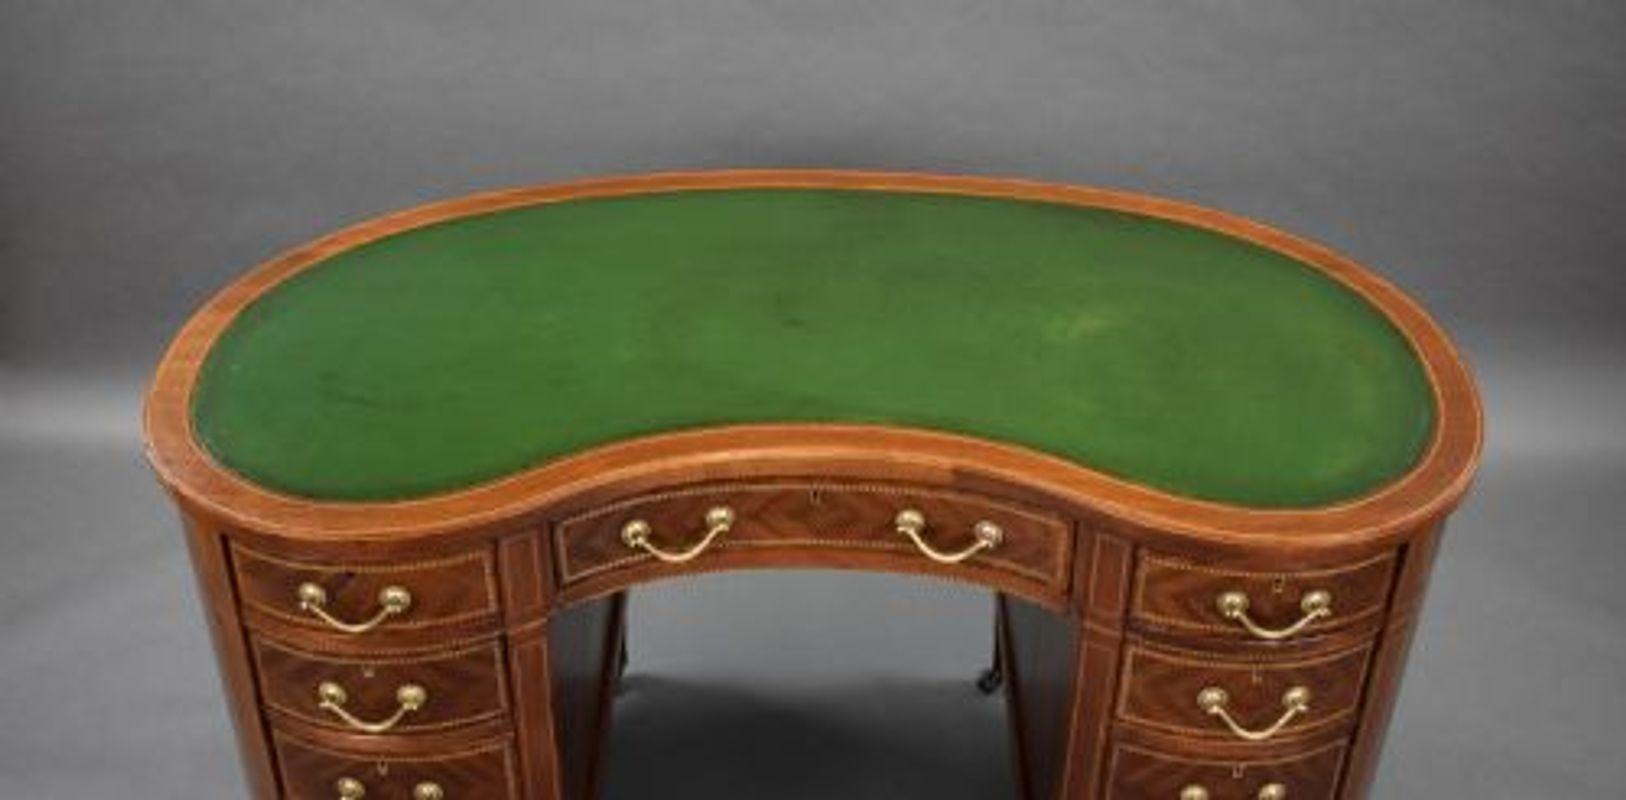 19th Century Victorian Mahogany Kidney Shaped Desk by Wolfe & Hollander For Sale